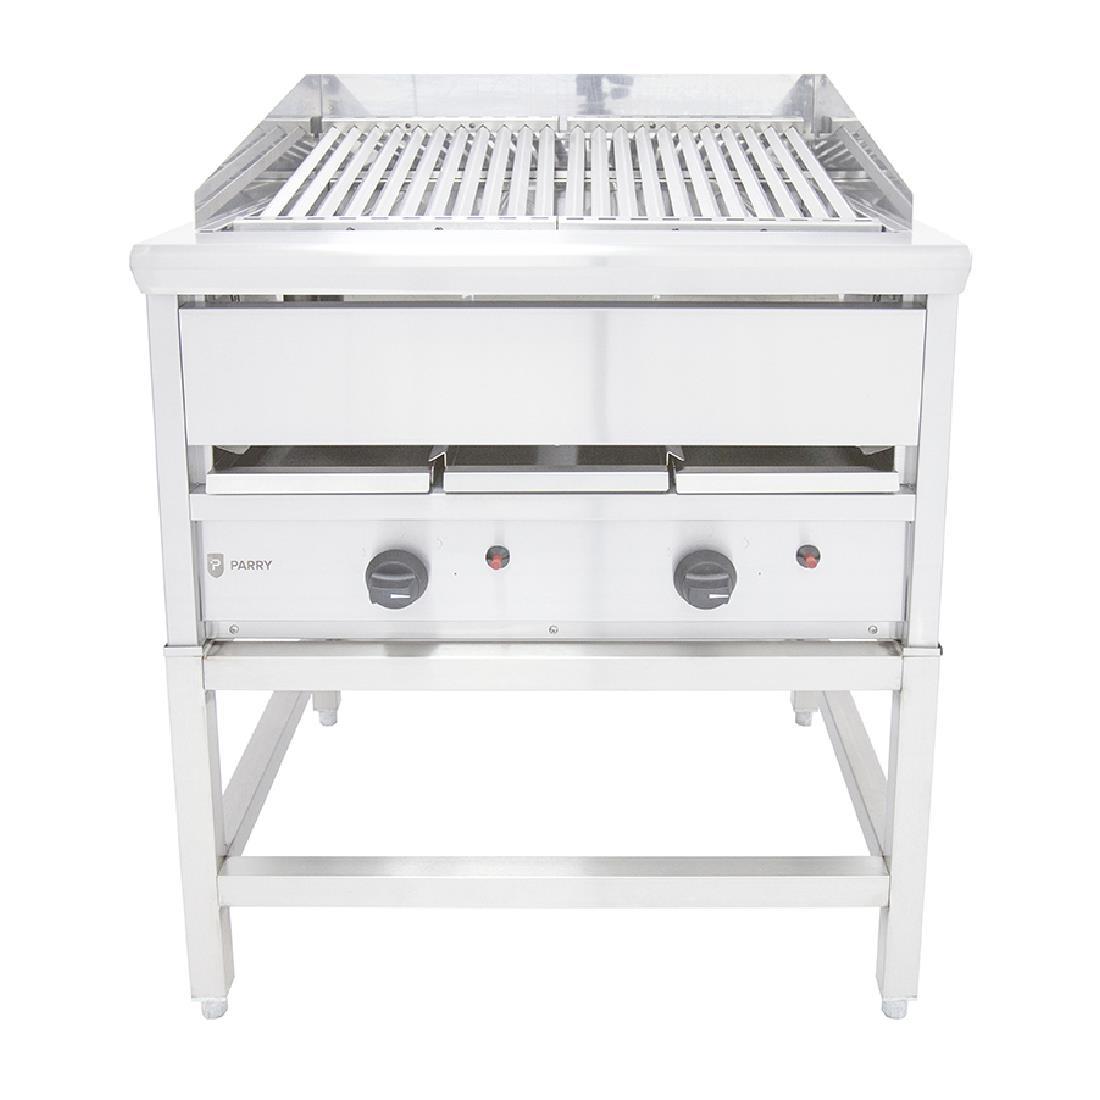 Parry Heavy Duty Chargrill UGC8P - GM787  - 1